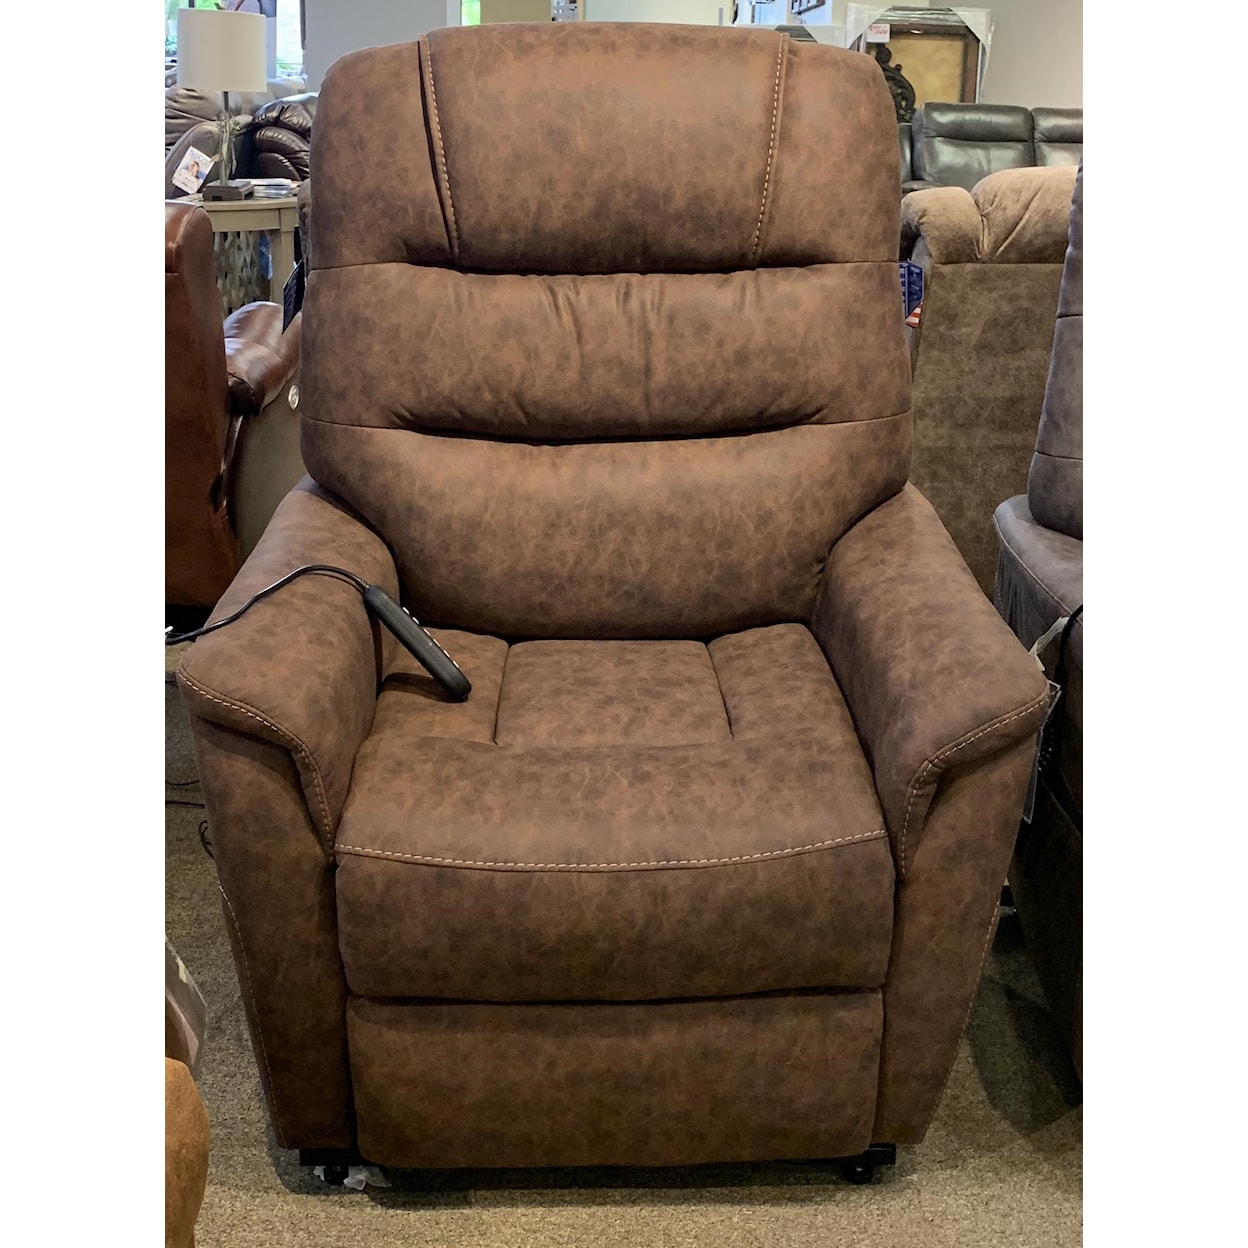 UltraComfort Tranquility Hickory Lift Recliner